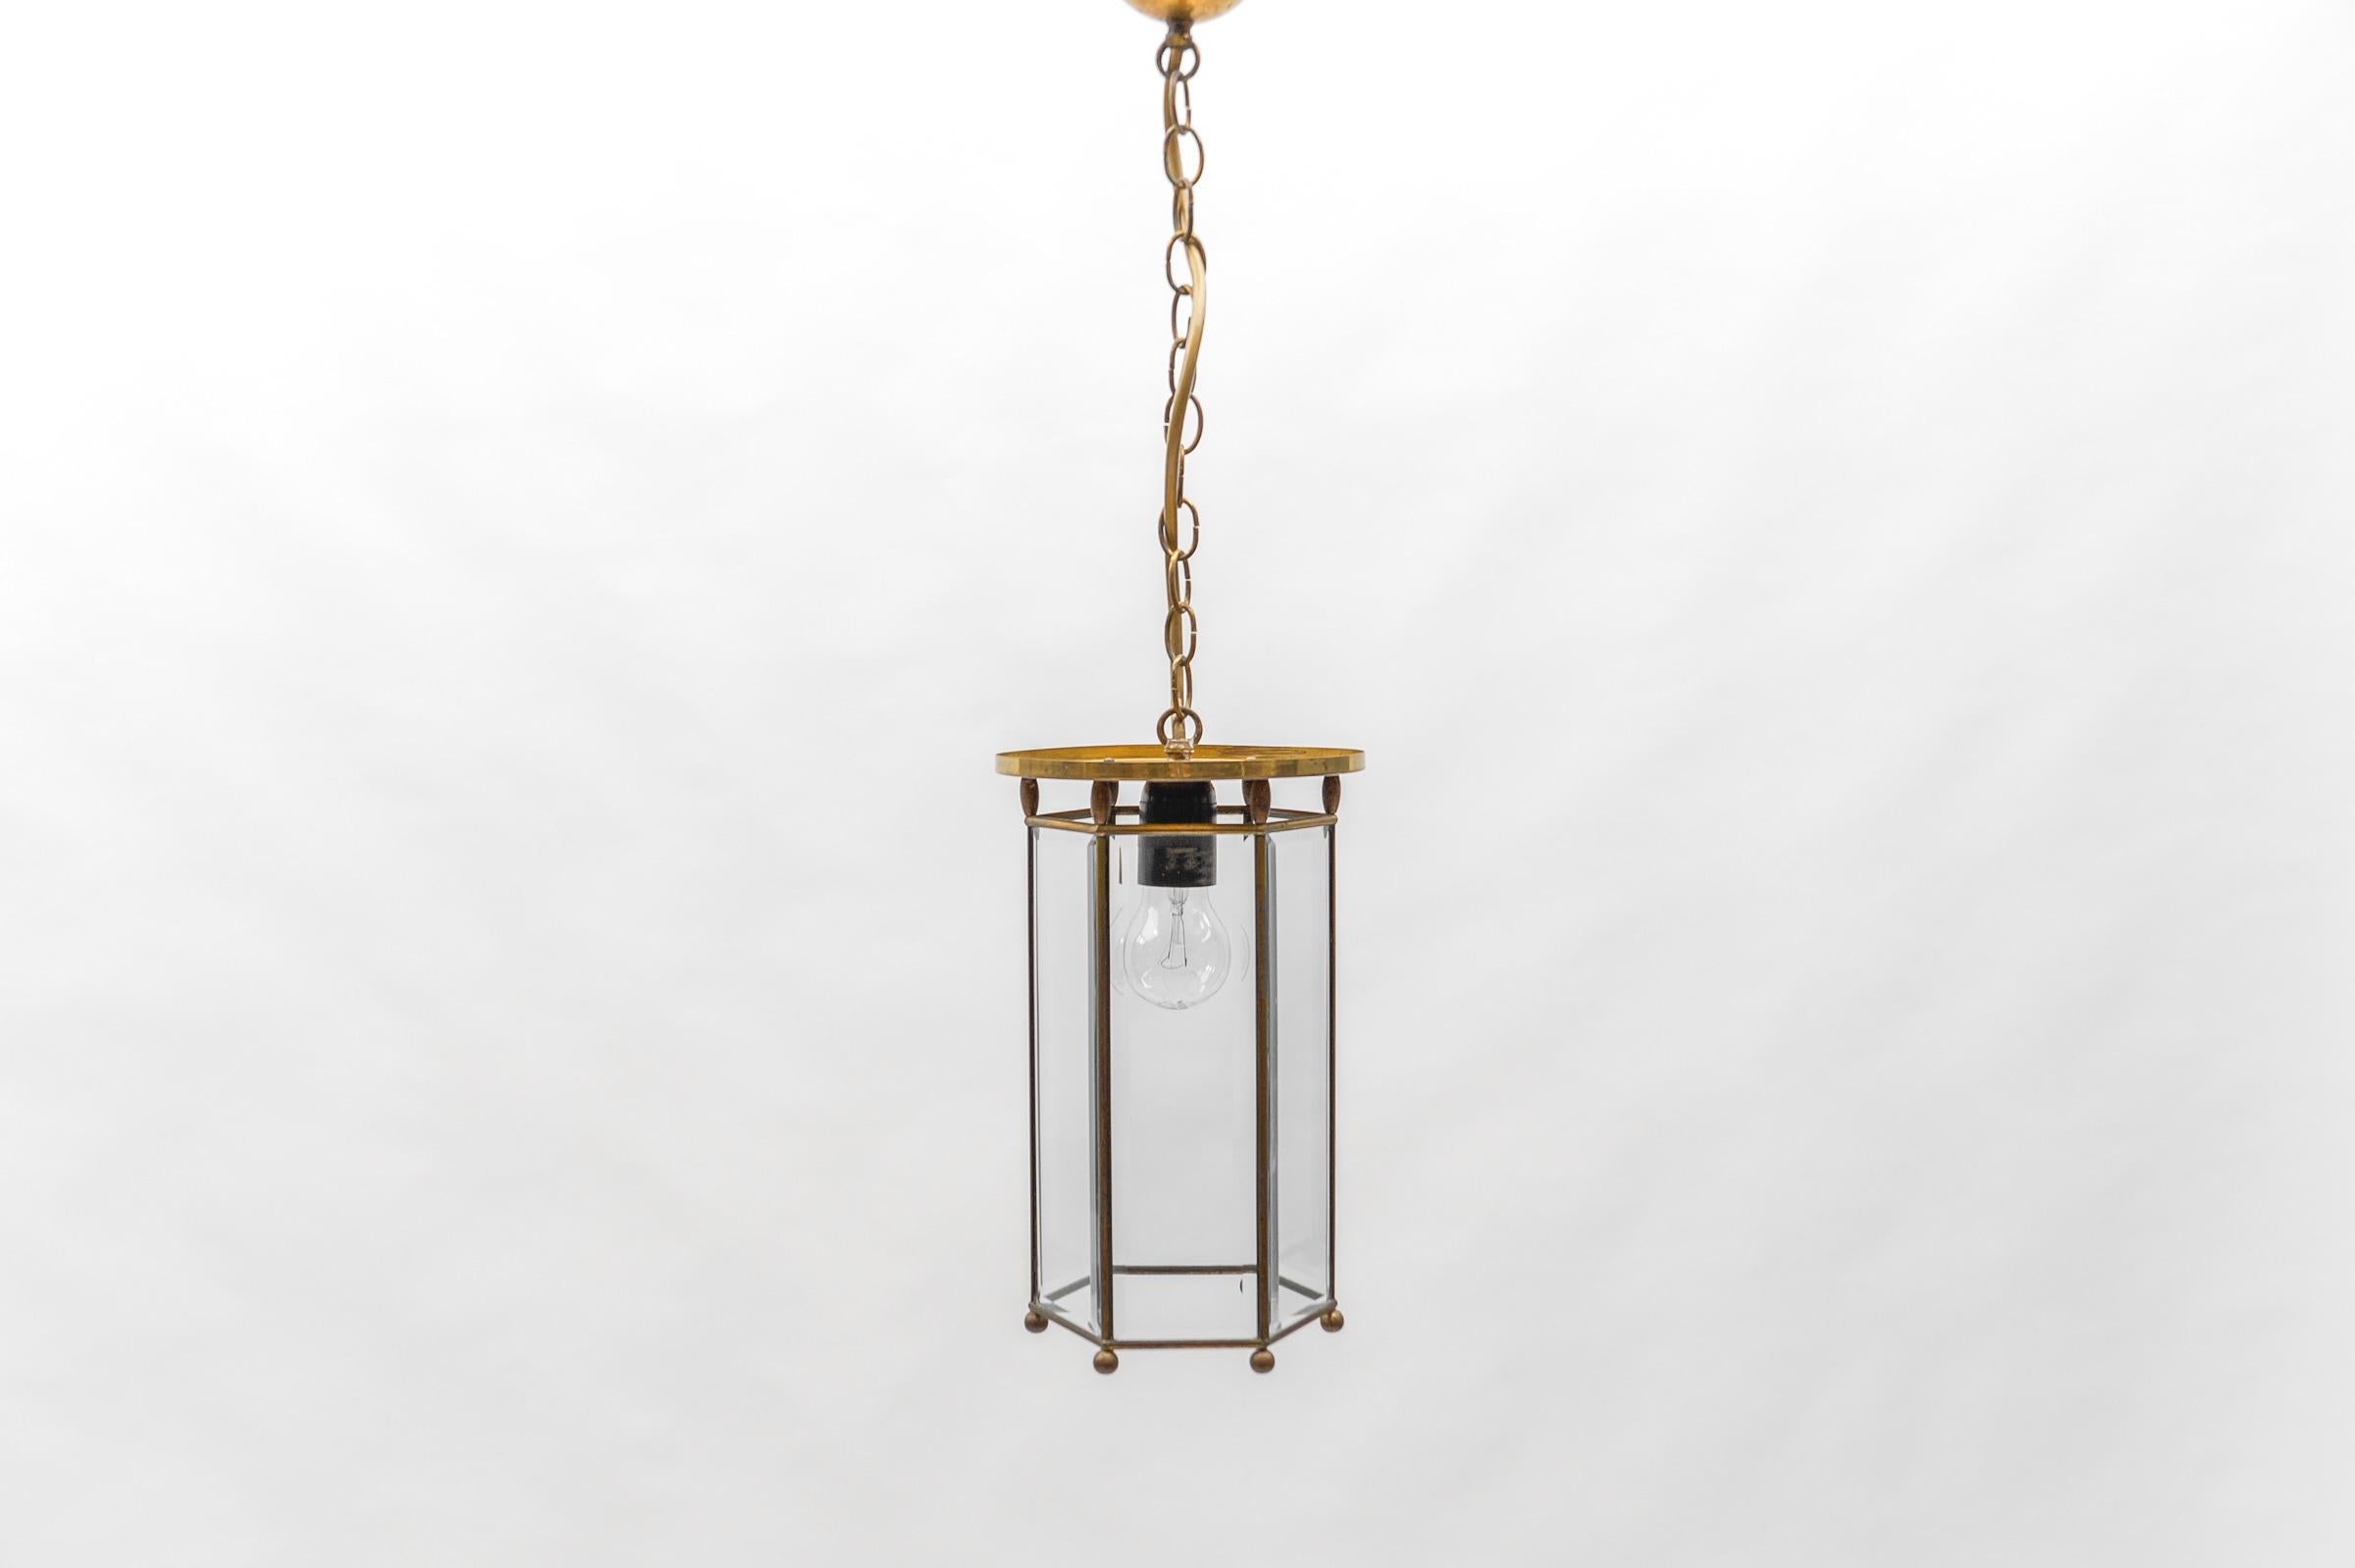 Lovely Adolf Loos Lobmeyr Light Cut Glass and Brass, Austria 1930s

The lamp needs 1 x E27 / E27 Edison screw fit bulbs. It is original wired, in working condition and runs on 110 / 230 volt.

Light bulbs are not included.

It is possible to install